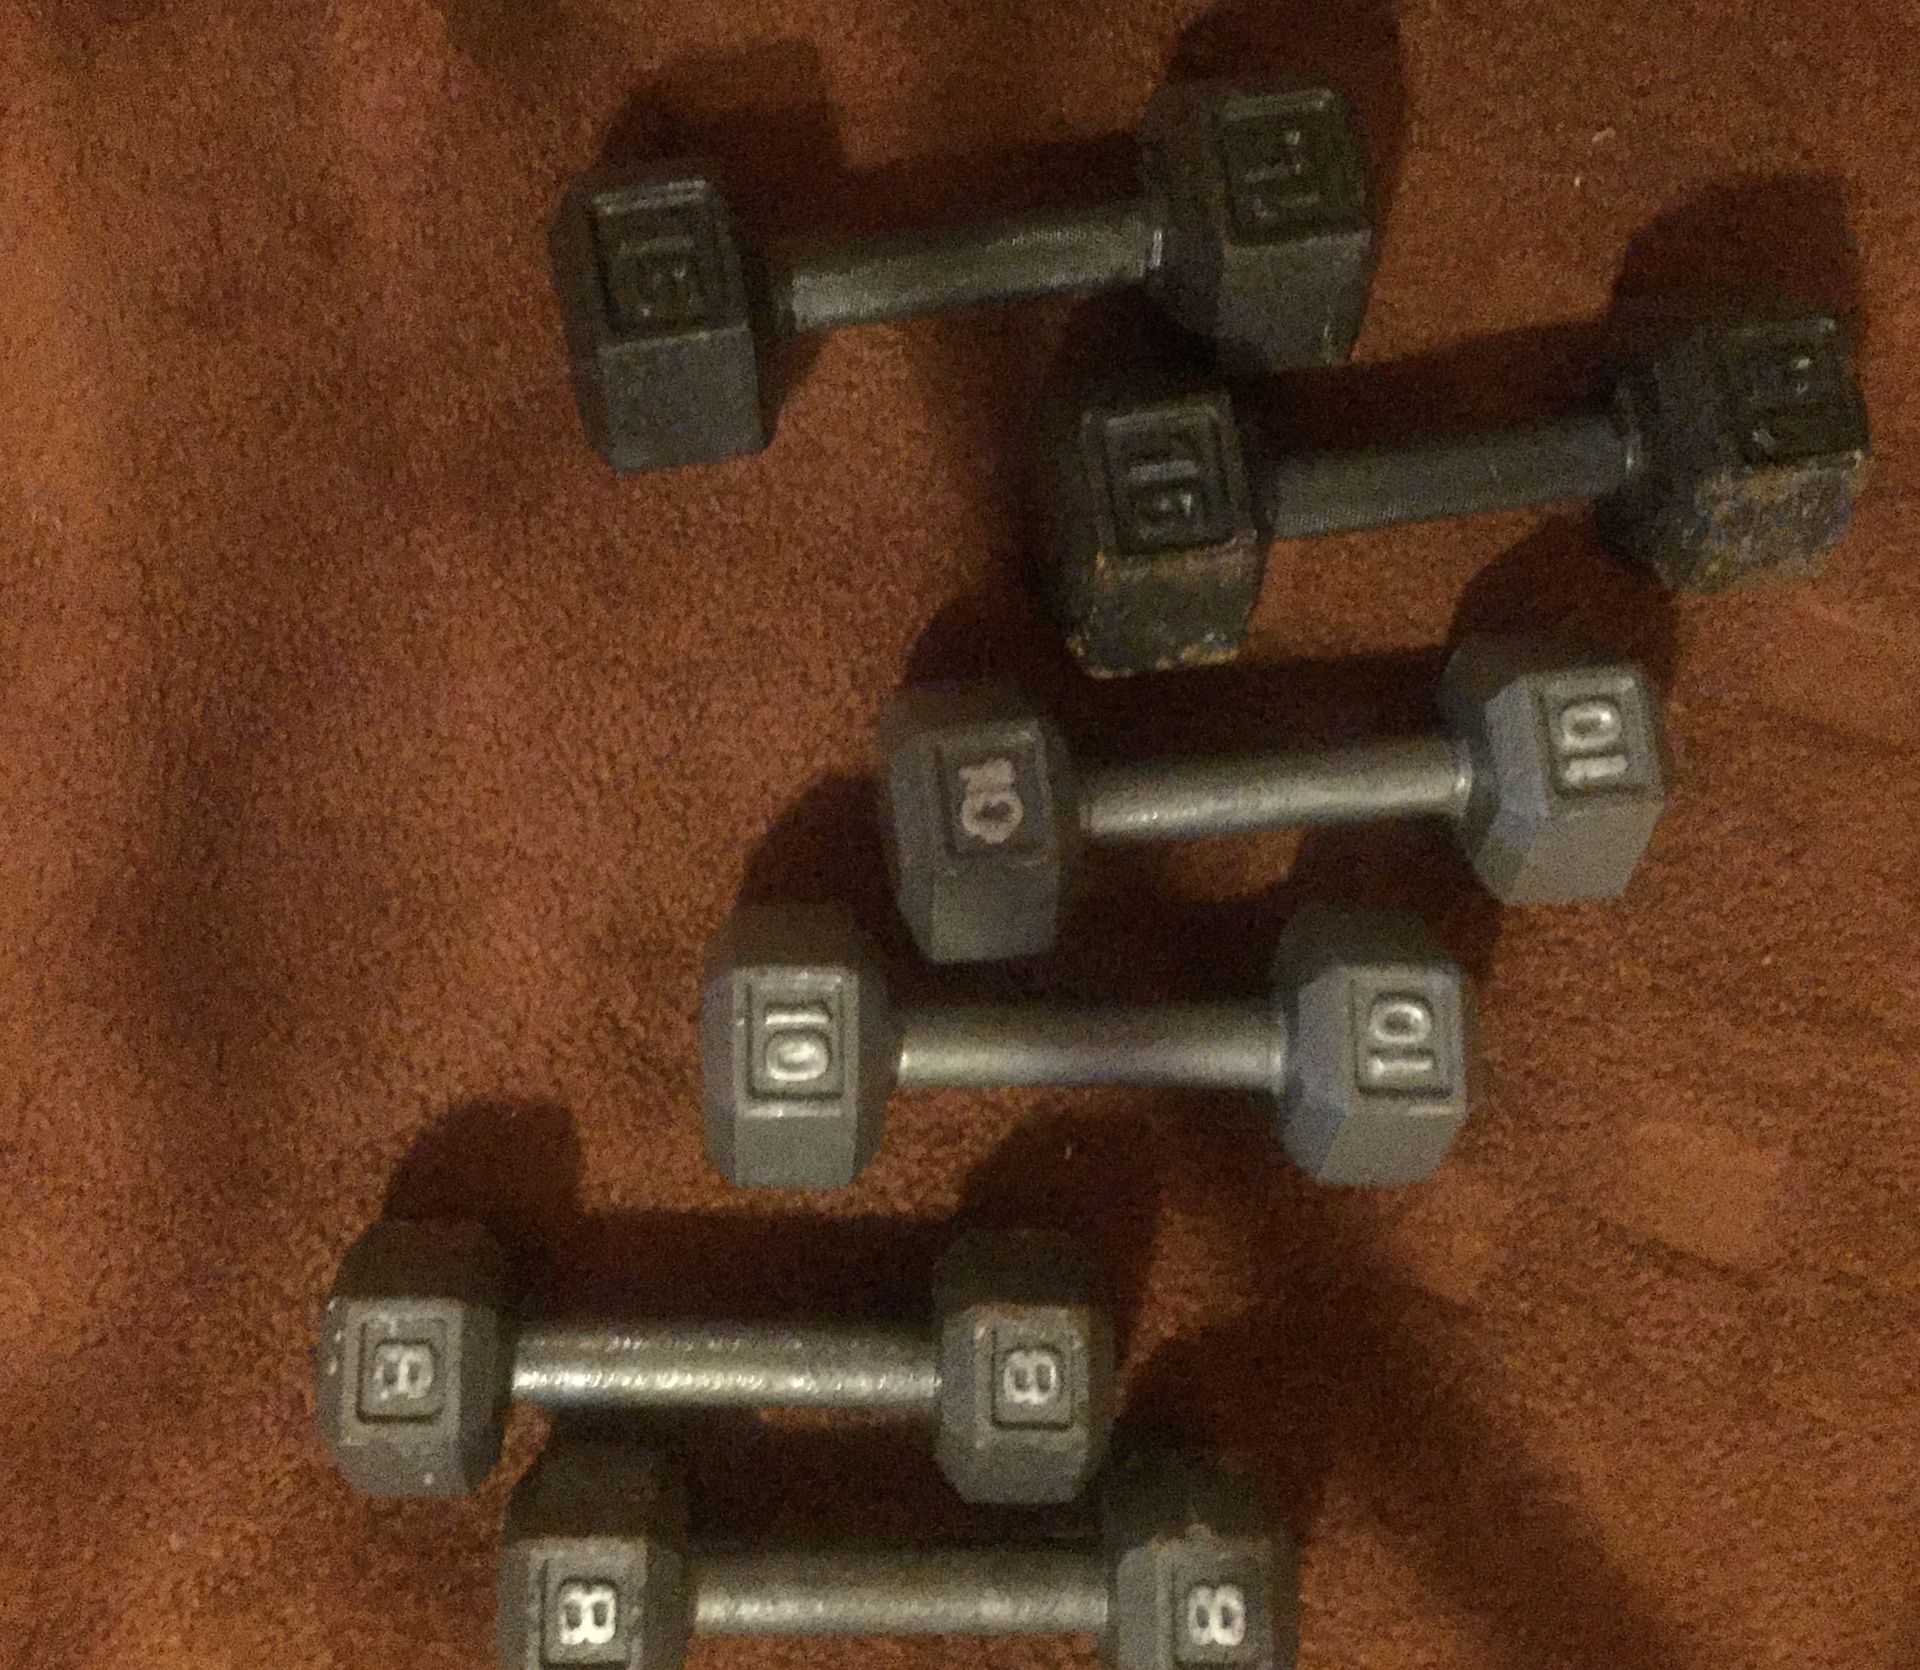 Cast-iron hex dumbbells three sets 66 pounds total